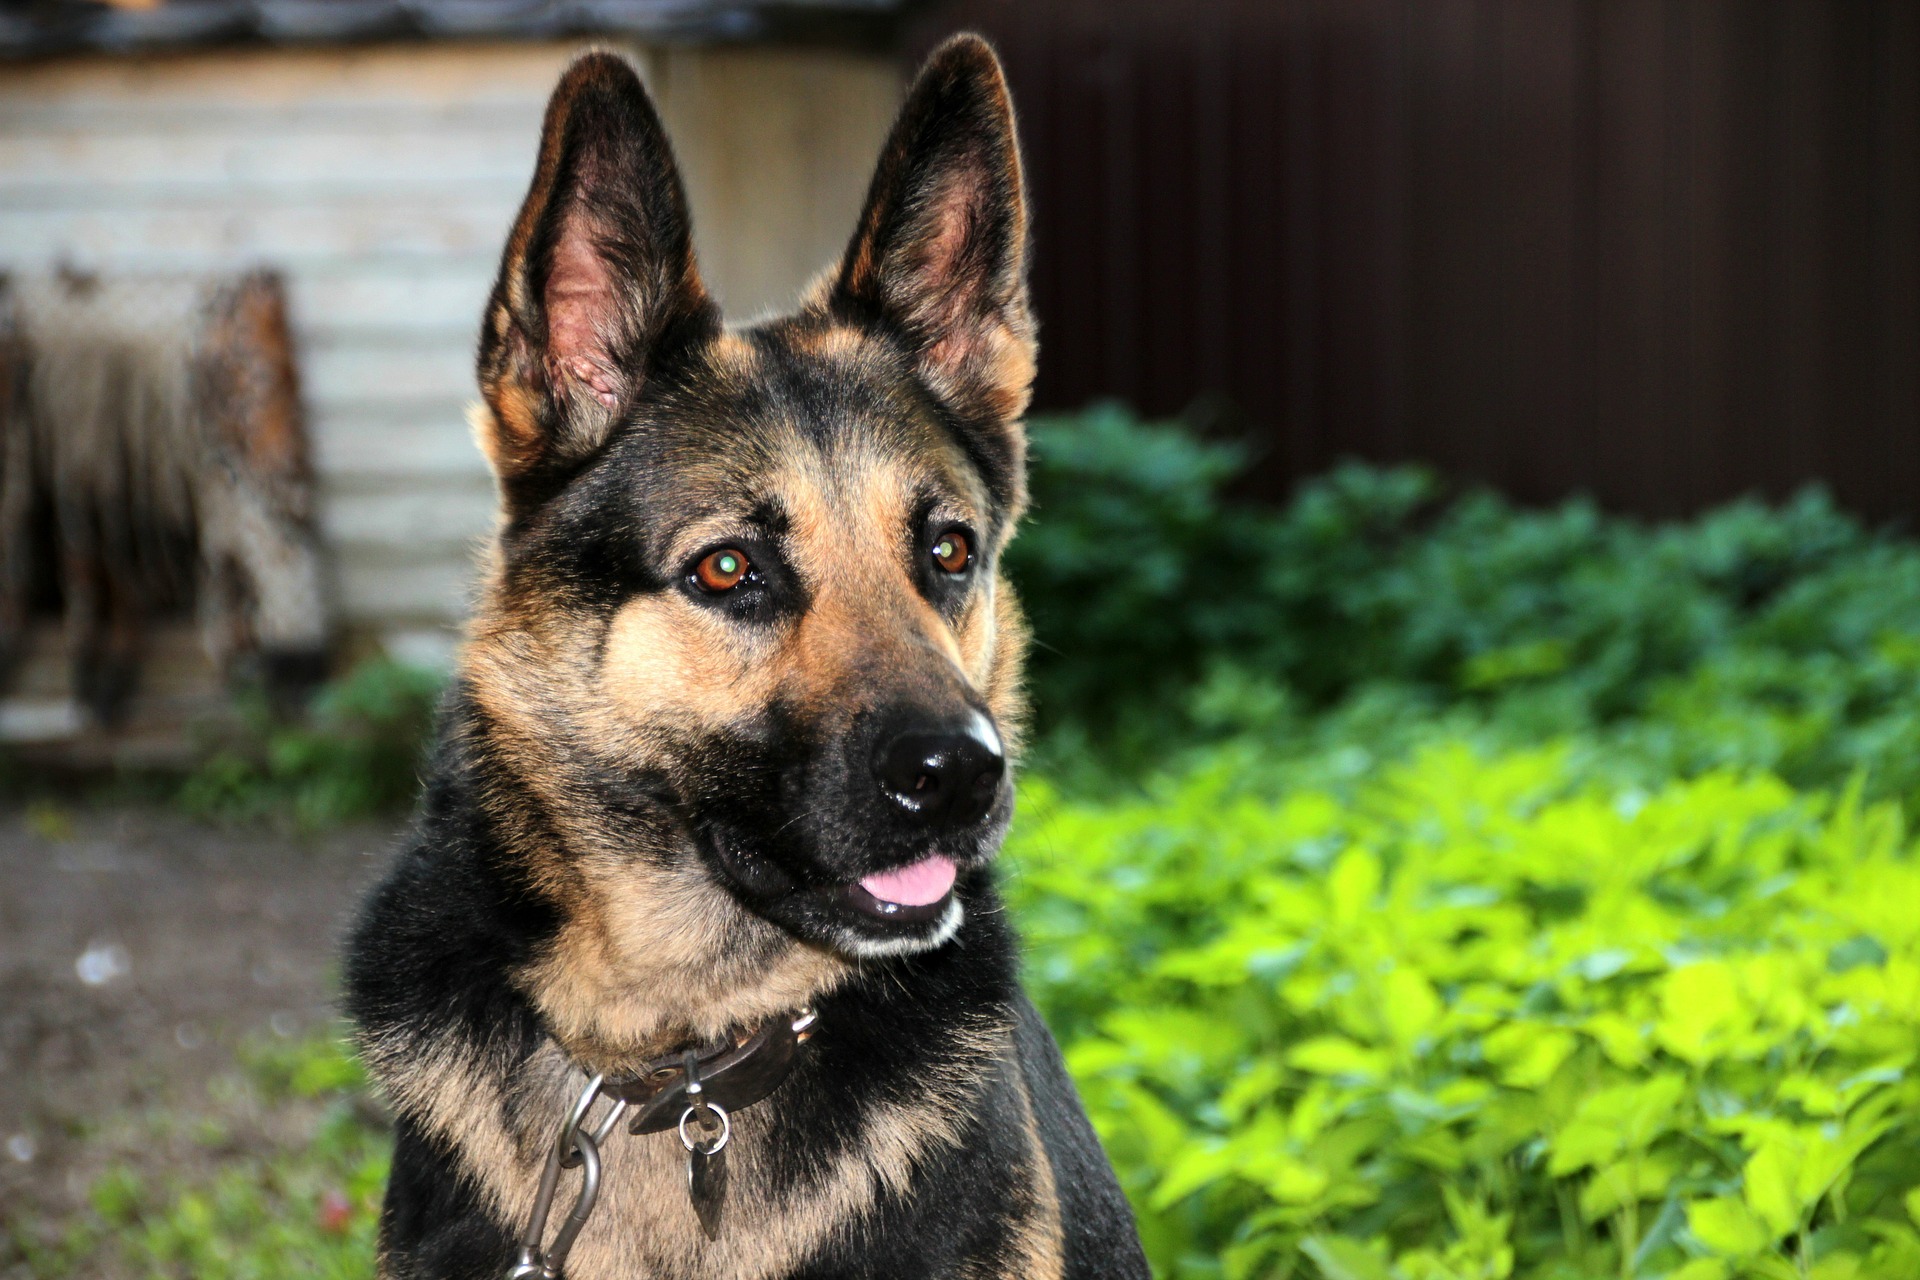 Dogs for adoption at UK German Shepherd rescue. We have dogs looking for their for-ever loving homes, all our dogs are matched to their most suitable homes.